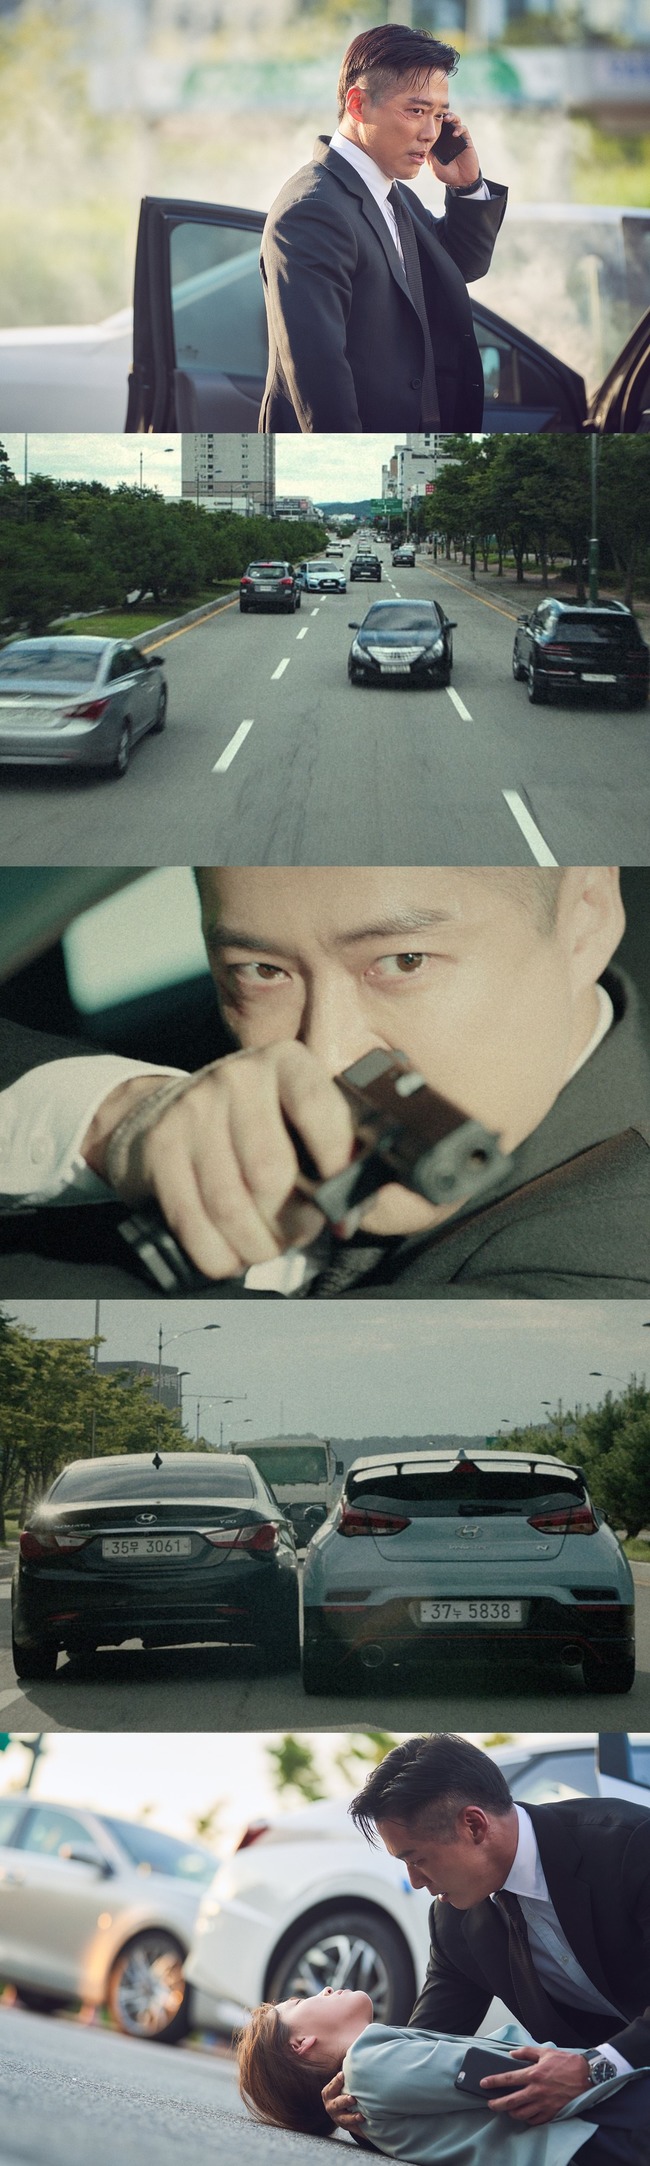 Black Sun is expected to show the true value of spy action Blockbuster LLC as a brilliant chase god.In the 5th episode of MBCs Golden Sun (playplay by Park Seok-ho / Director Kim Sung-yong), which airs at 9:50 p.m. on October 1, a sharp conflict relationship unfolds as Han Ji-hyuk (played by Nam Gung-min) begins to suspect Seo Soo-yeon (played by Park Ha-sun) as a traitor.Han Ji-hyuk was shocked to learn that Seo Soo-yeon was the person who received an emergency contact from Dandong when he and his colleagues were in an accident a year ago.As the possibility that she was an internal traitor who lost her fiance and resented Han Ji-hyuk in the accident increased, it confused viewers even more.As the story flows in an unexpected direction and adds tension to the drama, another huge chase god is anticipated, and it is expected that the eyes and ears of the house theater will be enjoyed.In the last two broadcasts, Han Ji-hyuk has become a hot topic with a fierce car chase that seems to be watching a Blockbuster LLC movie in the scene that chases Hwang Mo-sul (Sung No-jin) of Hwa-yang.The 5th broadcast on the day will also provide urgency with a chase that makes your hands sweat.In the public steel, two cars driving in the middle of the day and Han Ji-hyuk, who is angry at someone and pointing at the gun, attracts attention.And one of them was a serious expression of Han Ji-hyuk who got off and talked to someone.His partner, Kim Ji Eun, is lying on the floor with a picture just before the collision with the coming truck, which stimulates curiosity about what happened to them.